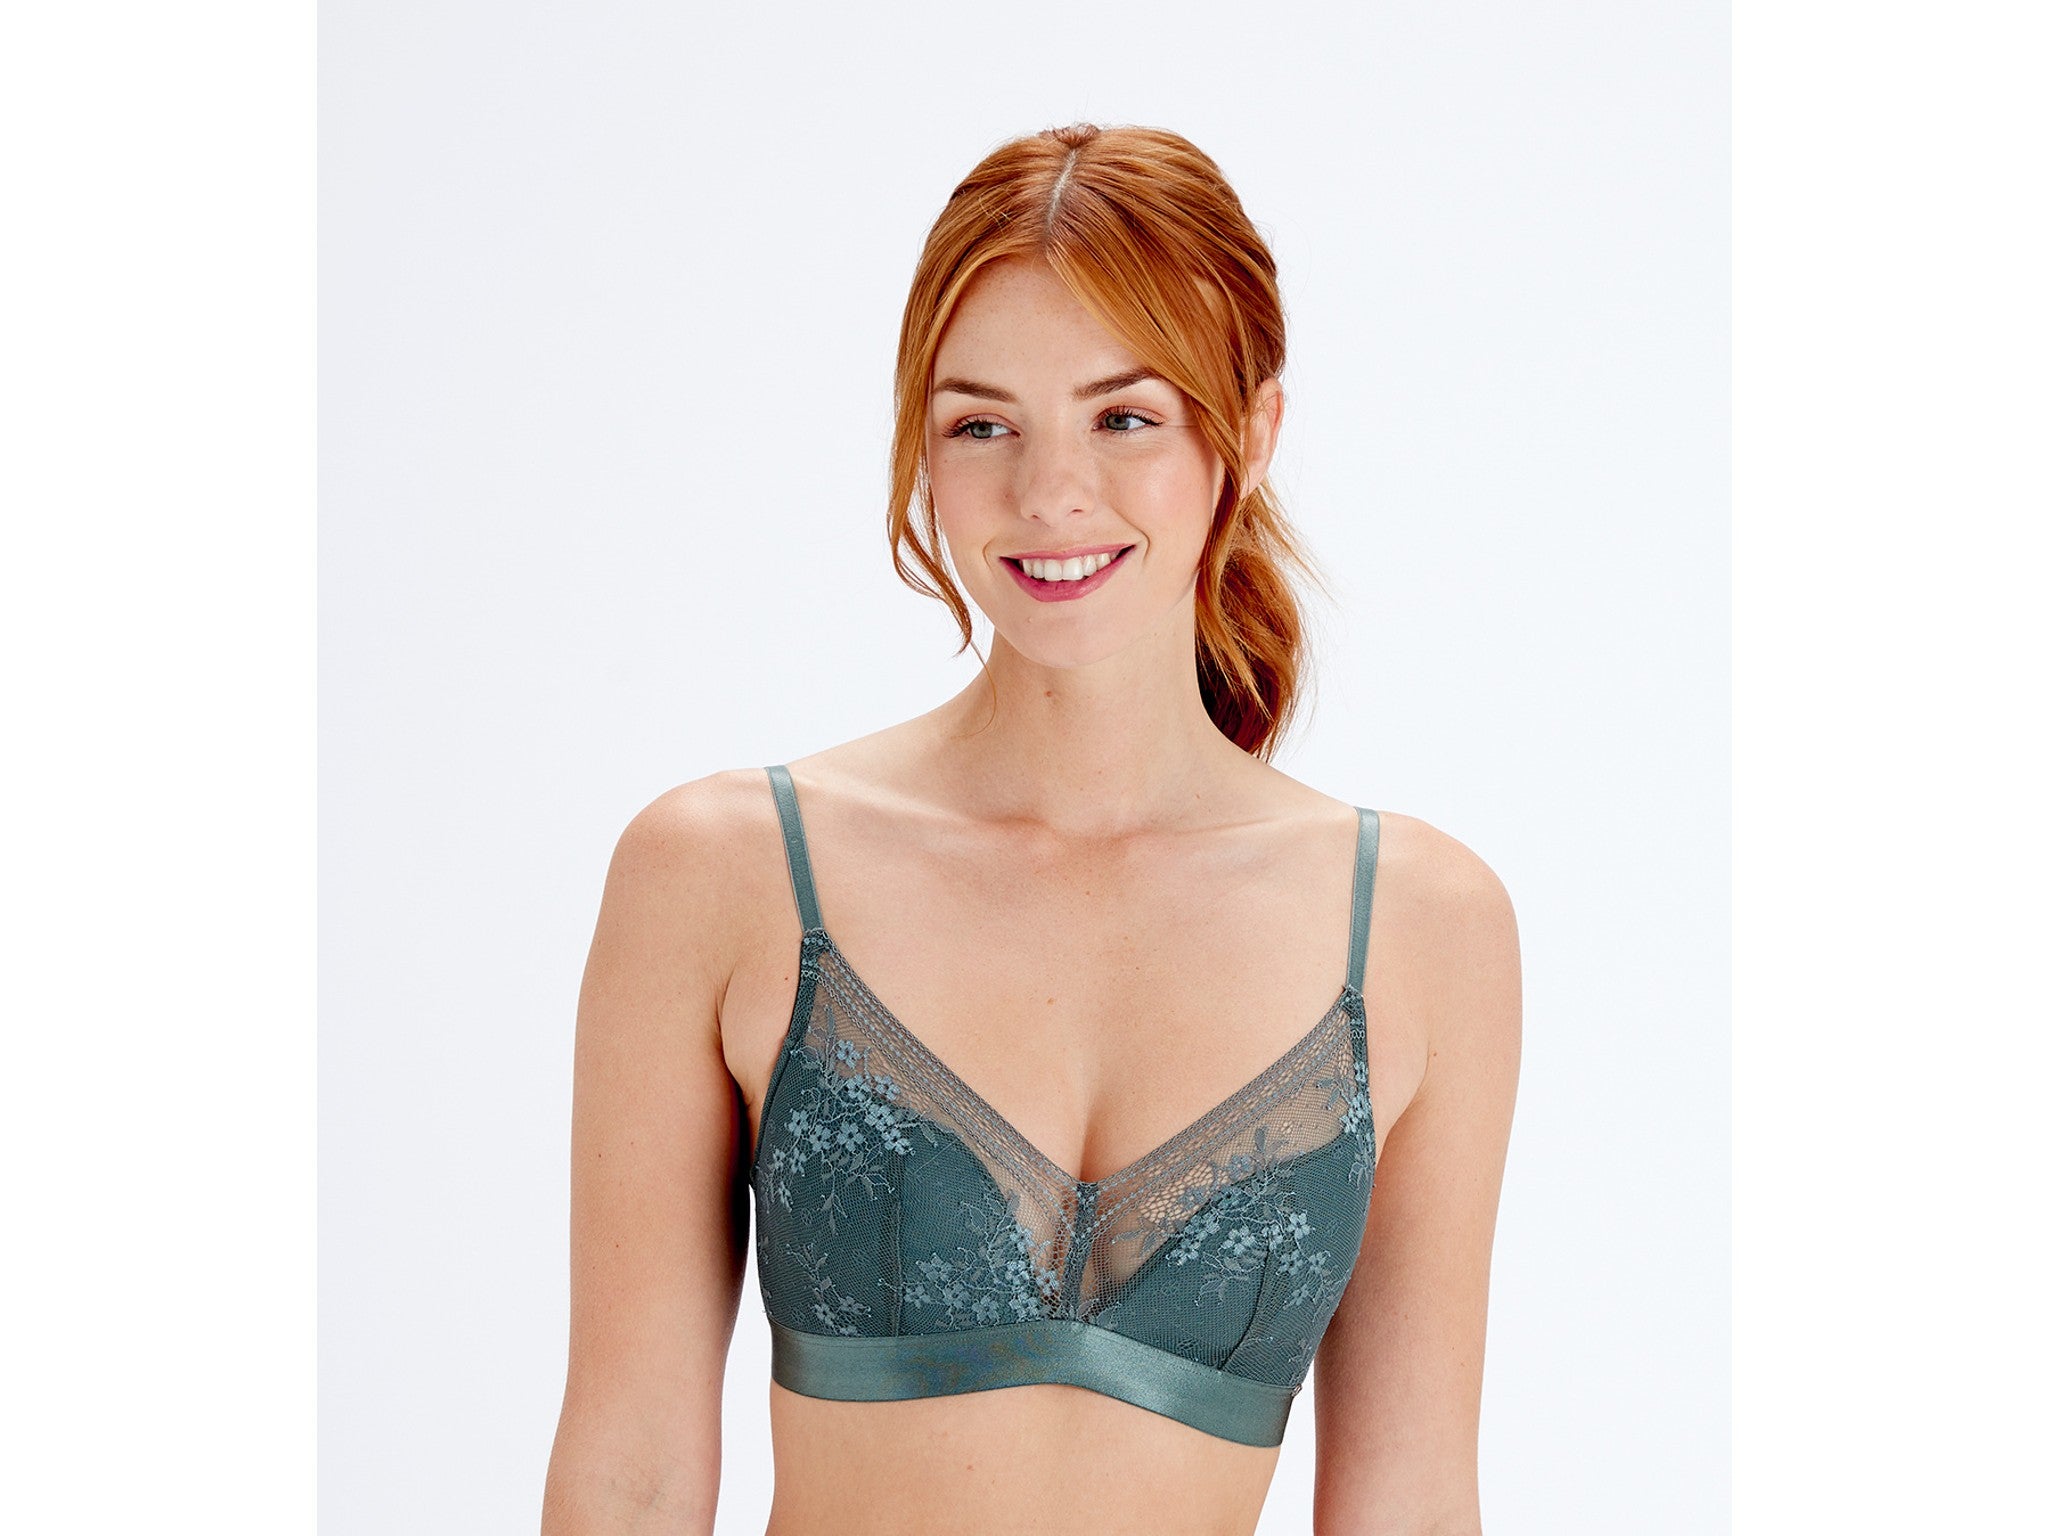 novelty Calculation jump in Most comfortable bra 2022: Bralettes, crop tops and more | The Independent